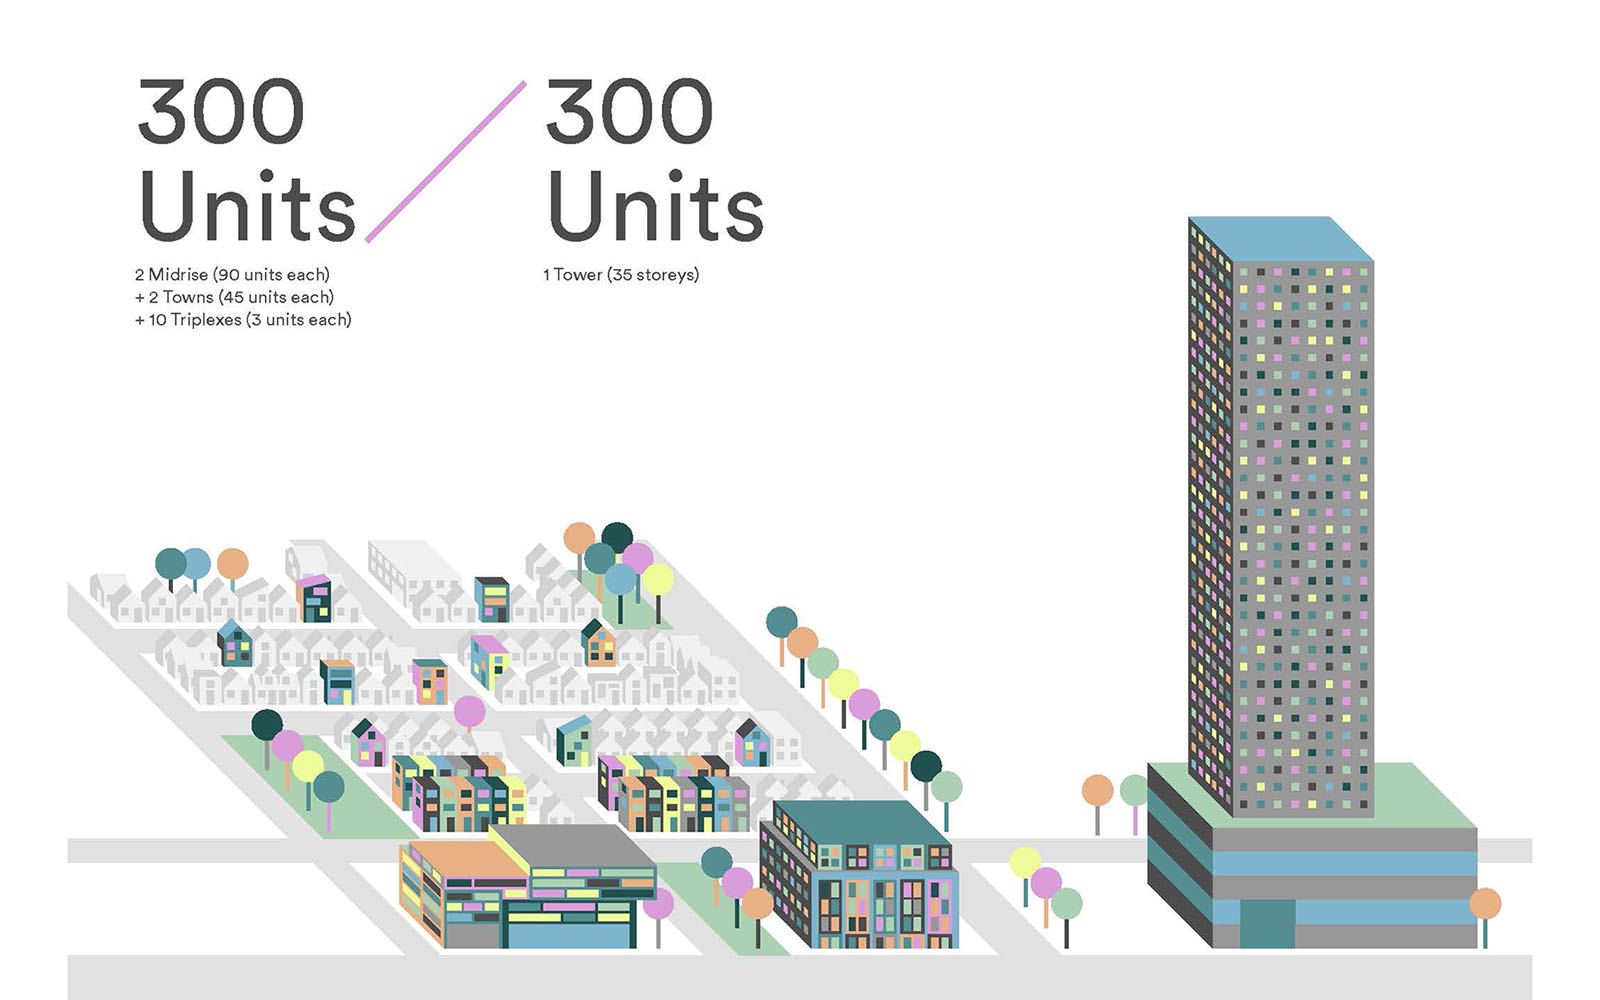 Illustration comparing housing densities and demonstrating smaller footprint of tall tower